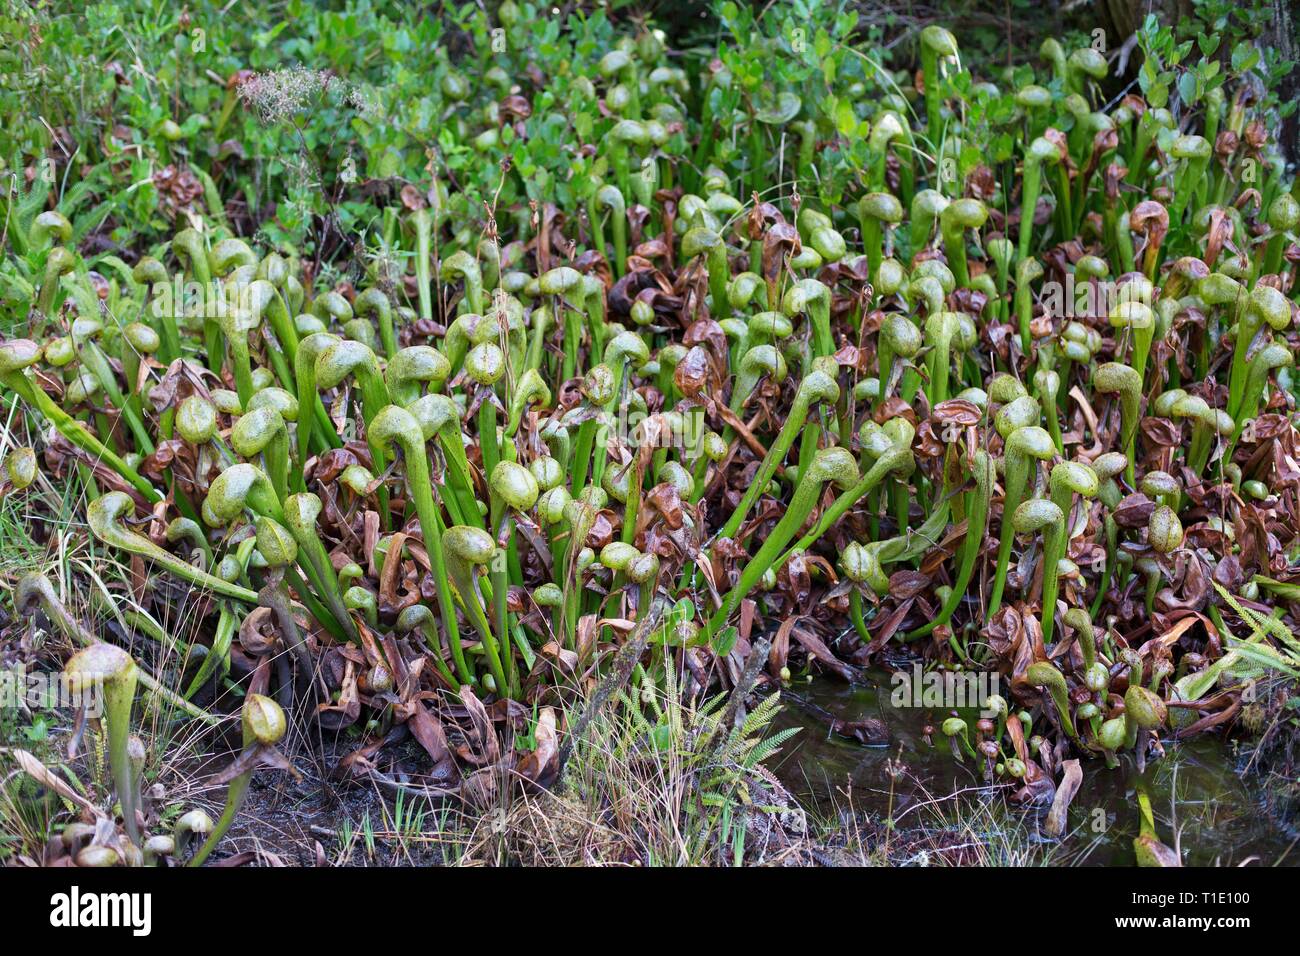 Darlingtonia californica, also known as Pitcher Plant or Cobra lily, growing at Darlingtonia Natural Site in Florence, OR, USA. Stock Photo